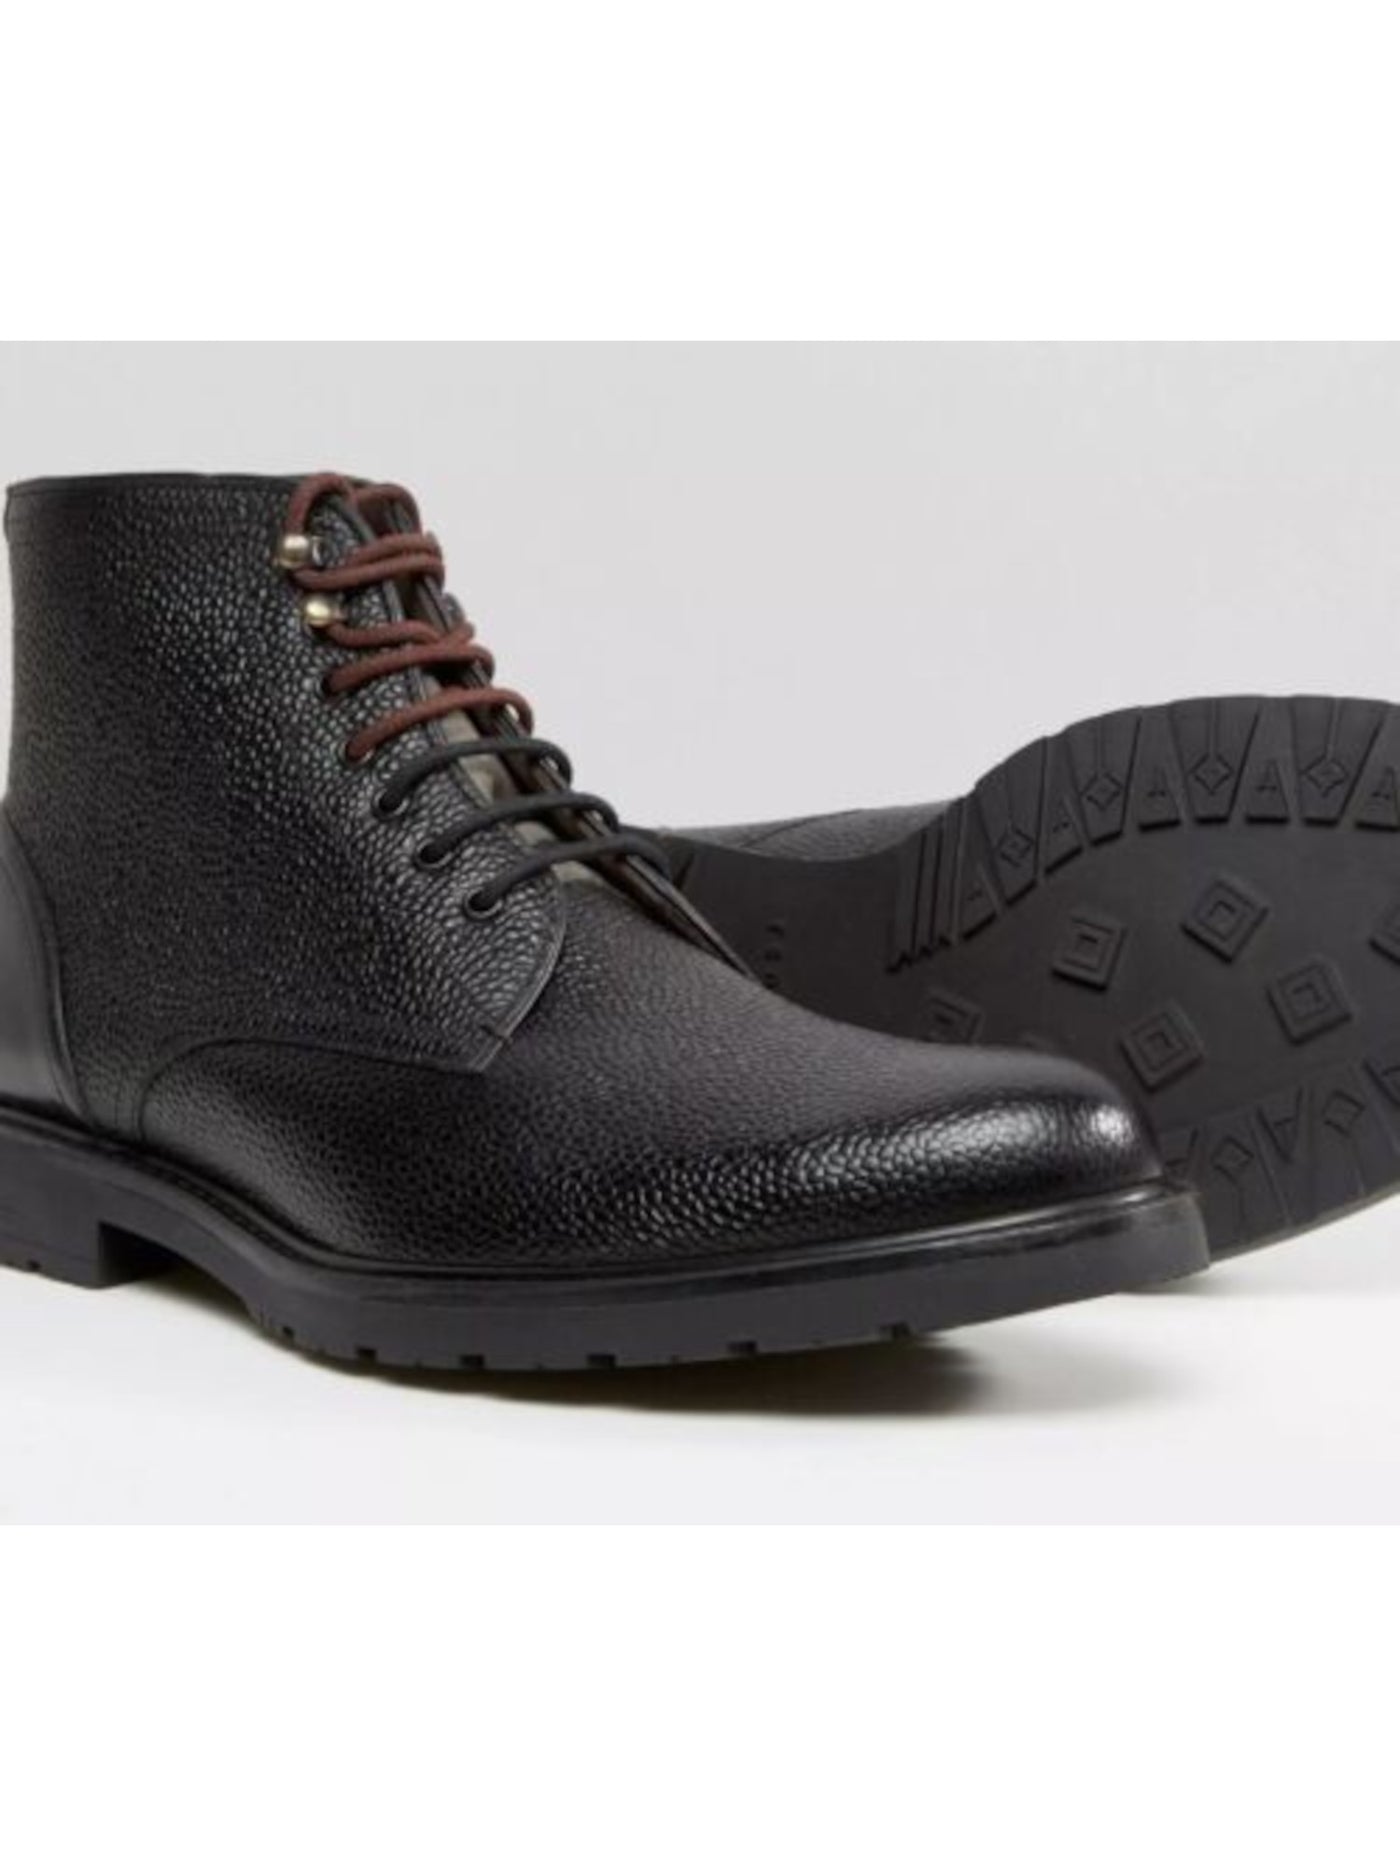 TED BAKER LONDON Mens Black Comfort Karusl Round Toe Block Heel Lace-Up Leather Boots Shoes 45